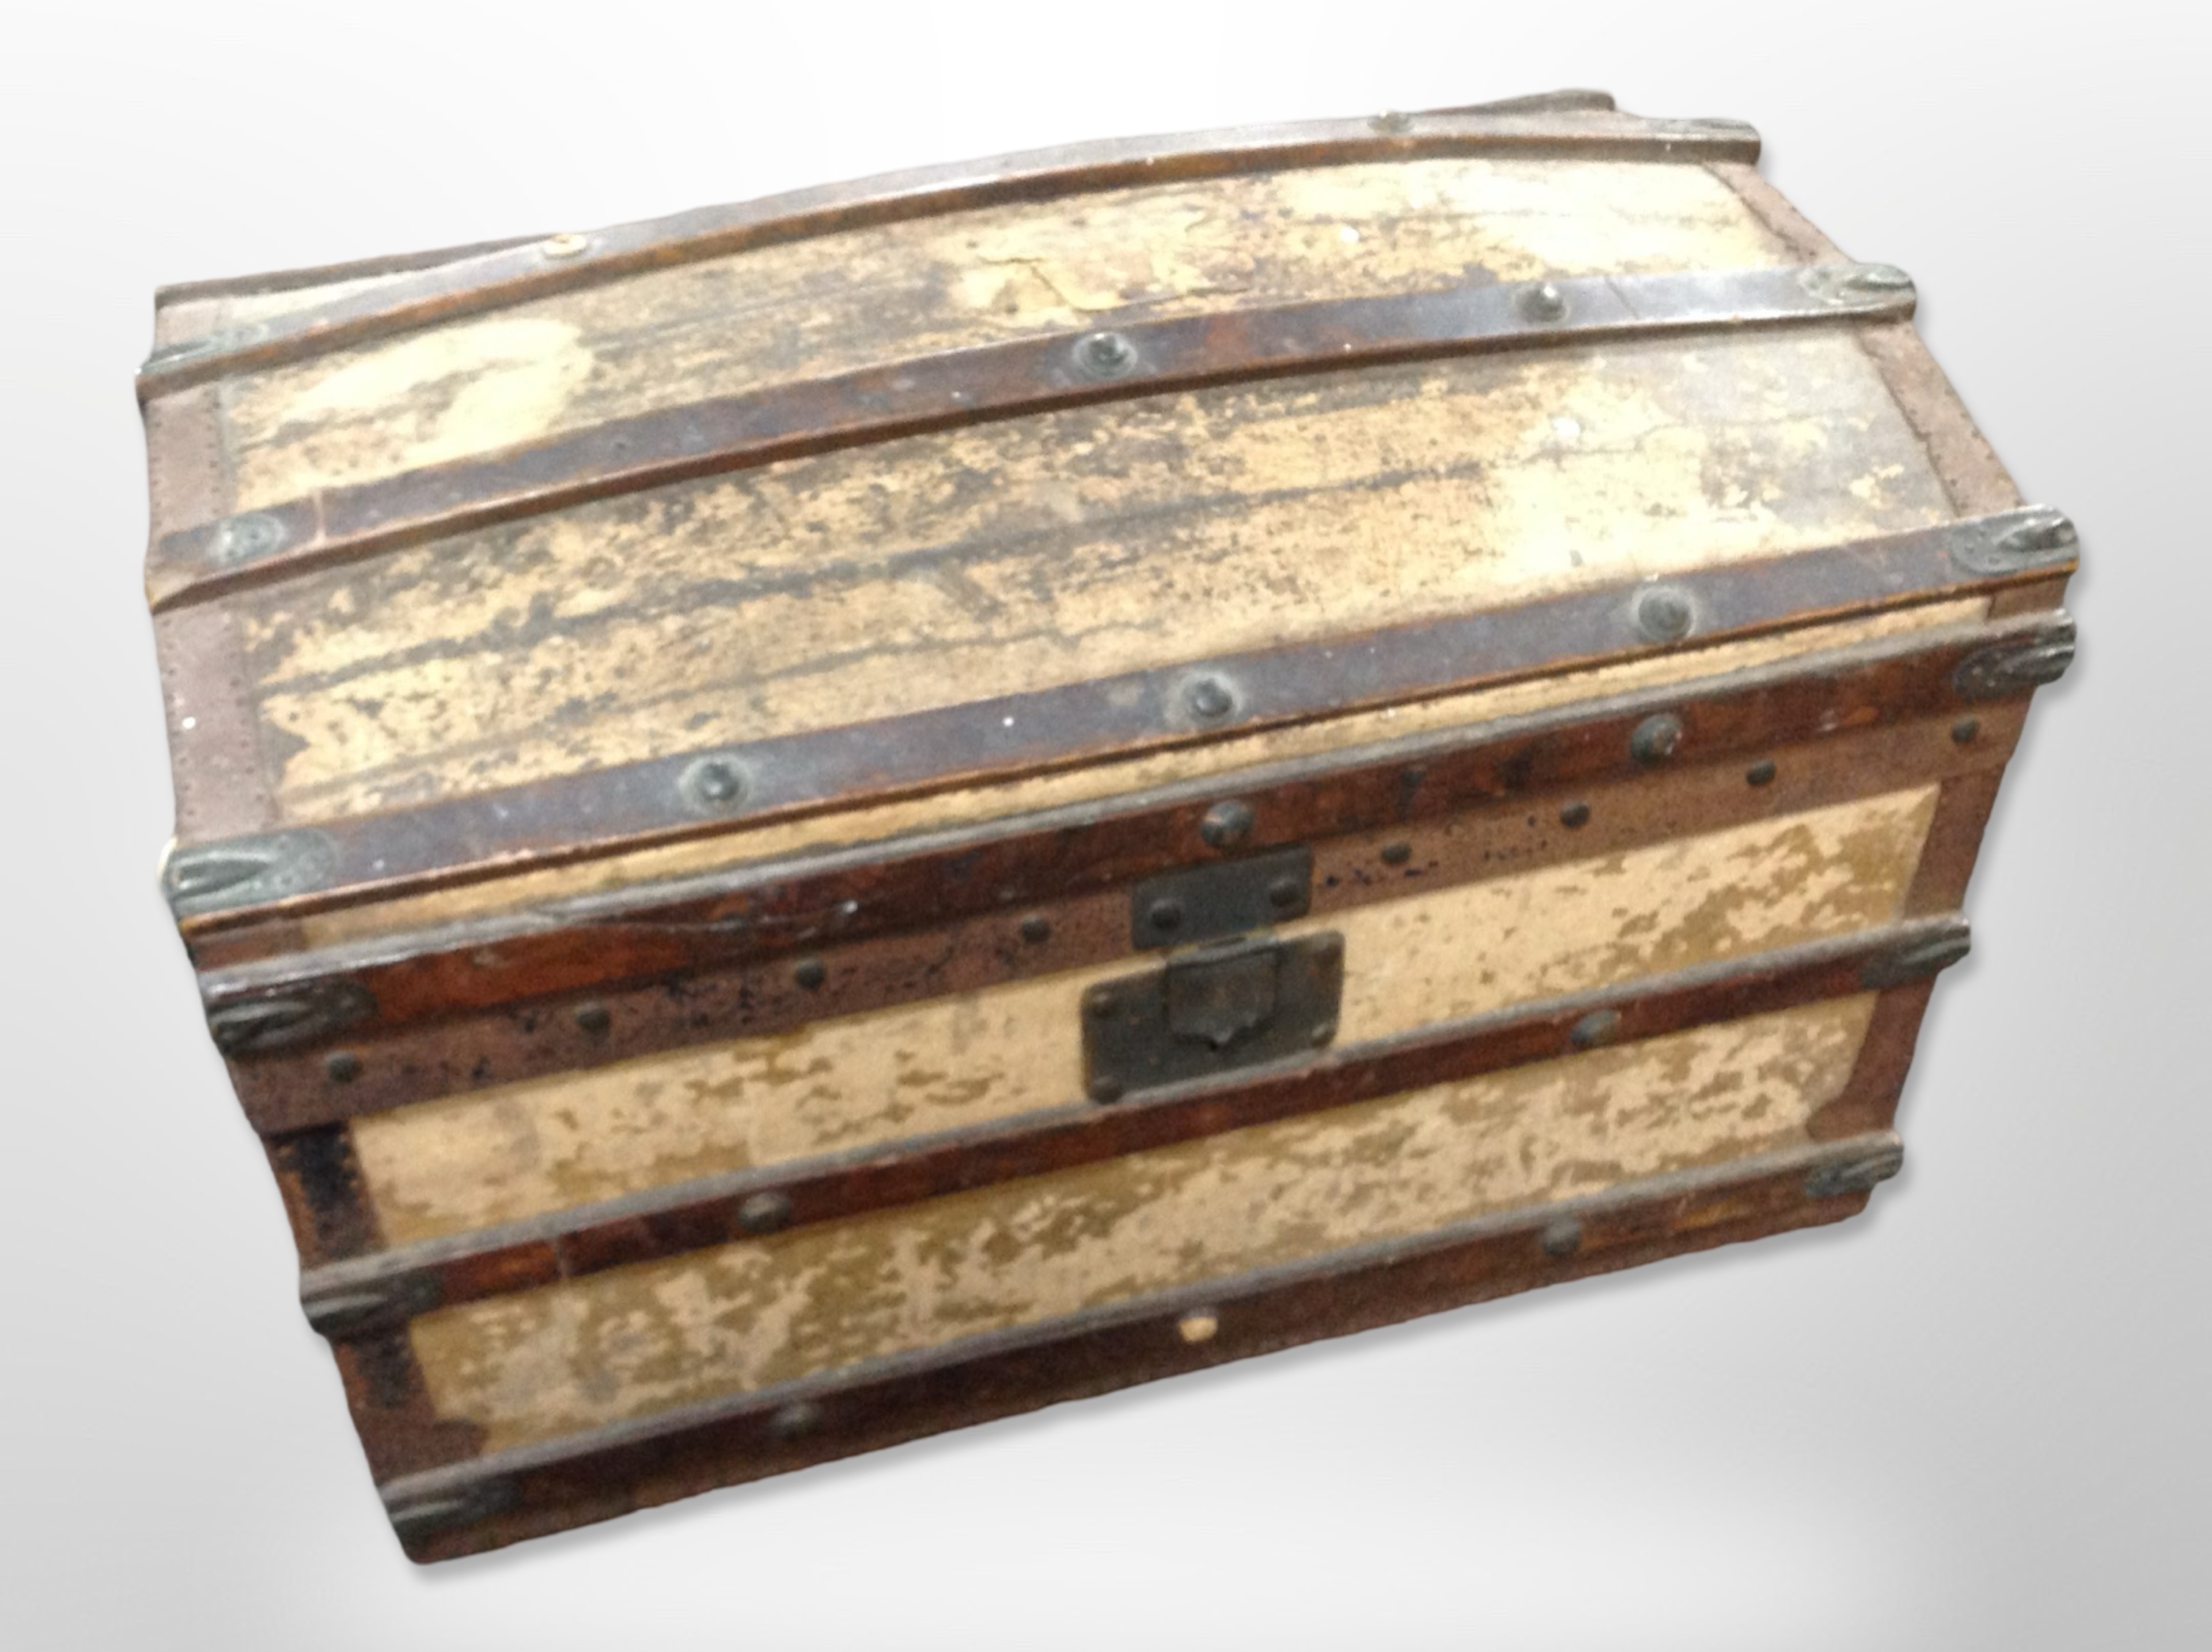 A 19th century canvas and wooden bound domed top trunk,